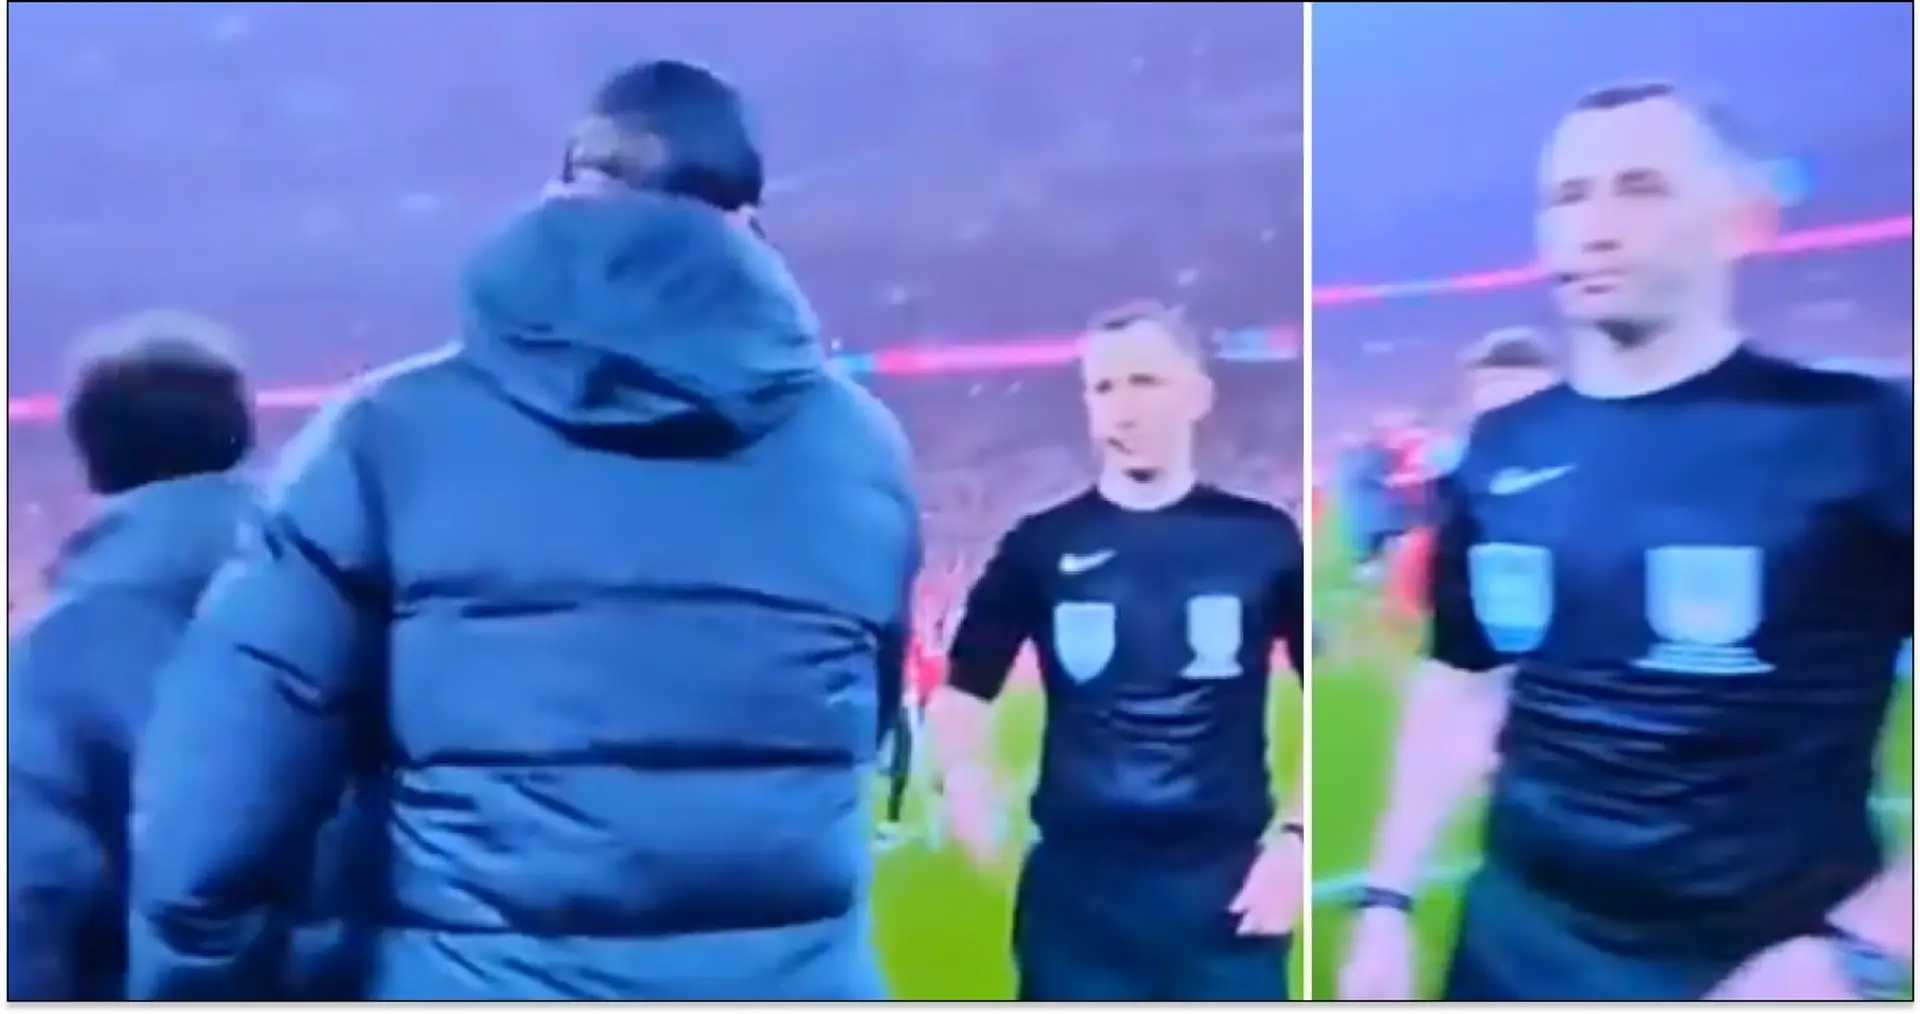 Klopp completely ignores referee handshake after Chelsea, says Kavanagh 'not at level'